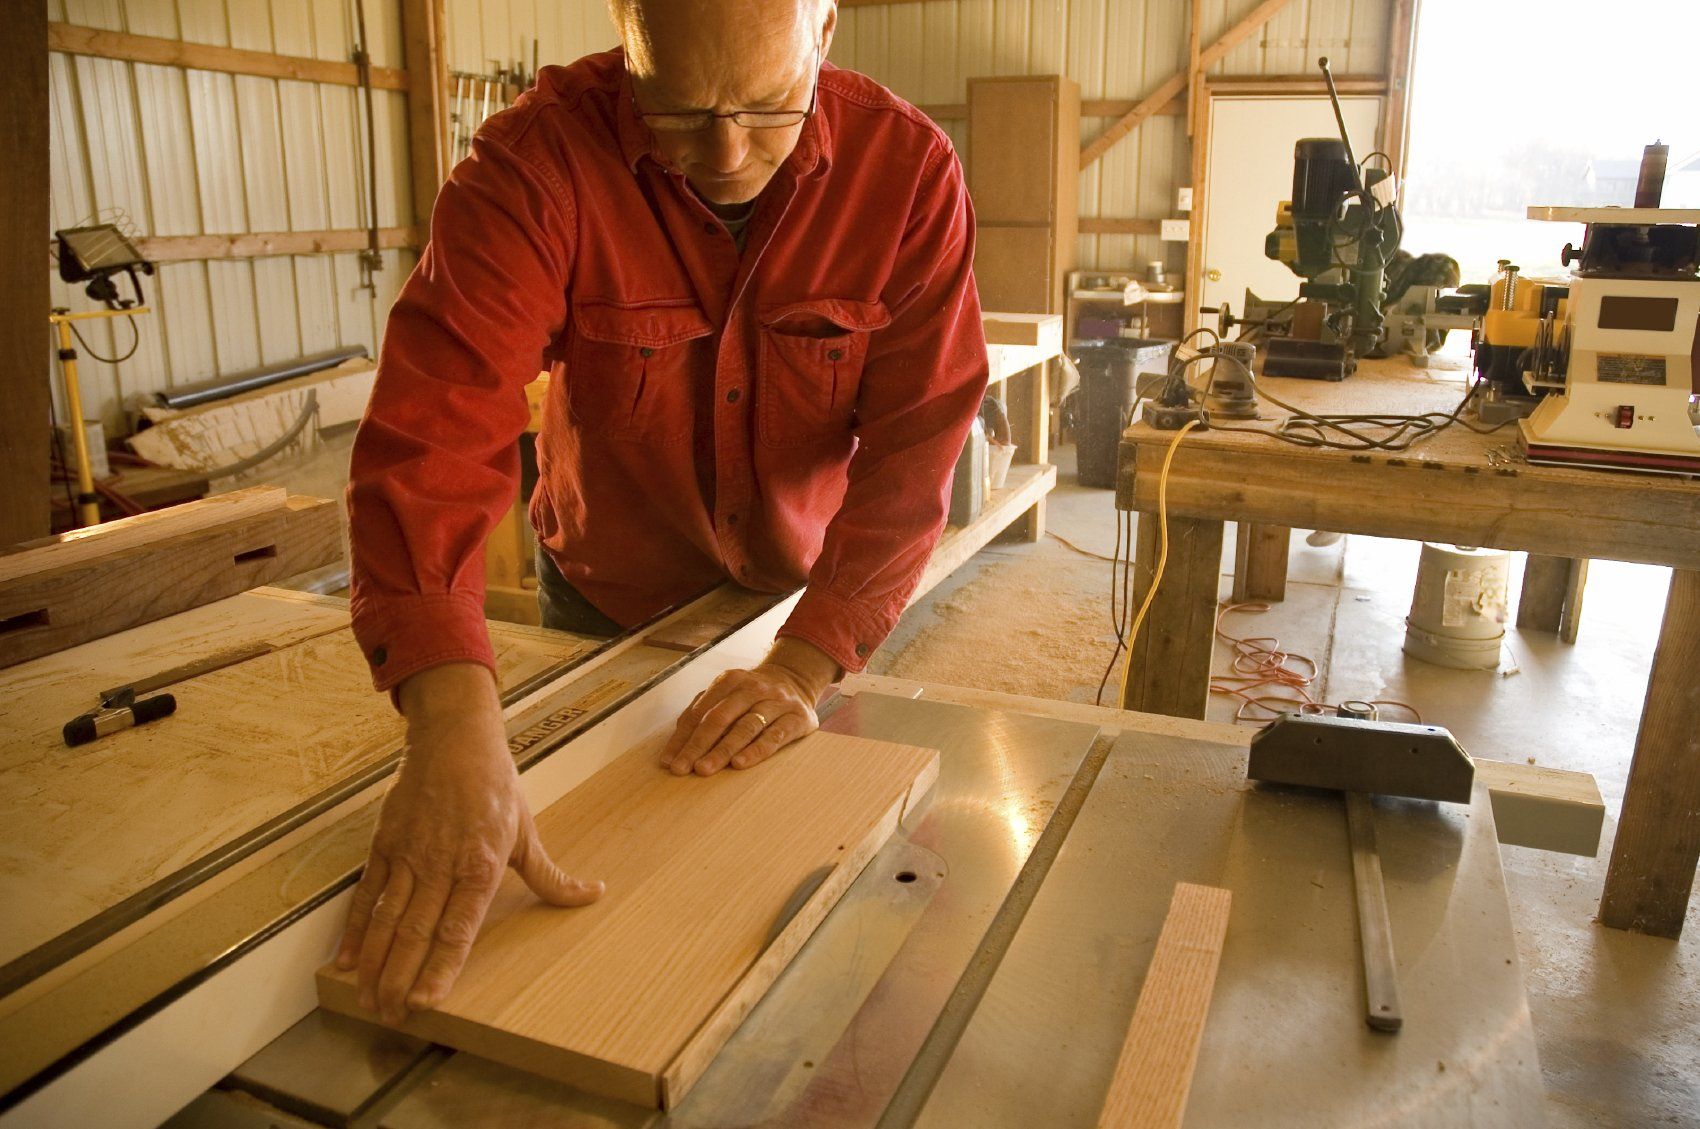 An older man working on a woodworking project